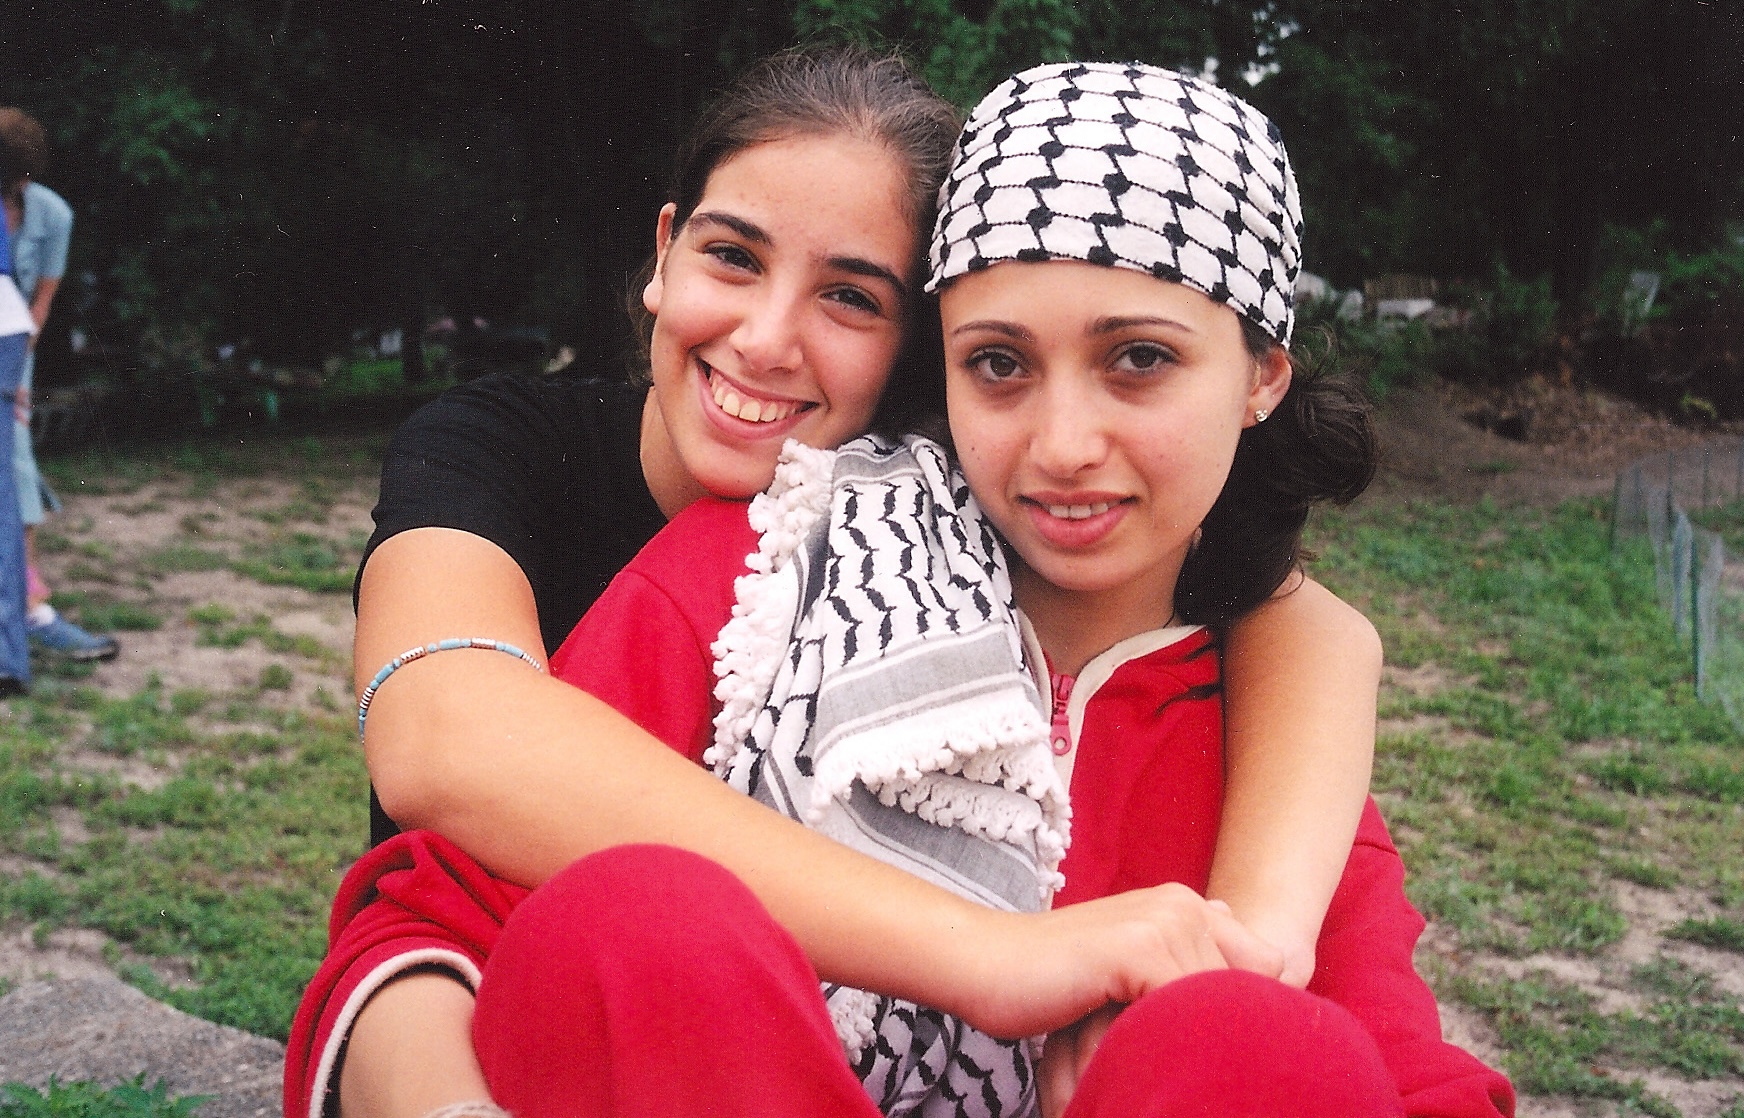 Photograph of two young women in a park. One woman smiles and hugs the other, who wears a Palestinian scarf on her head.